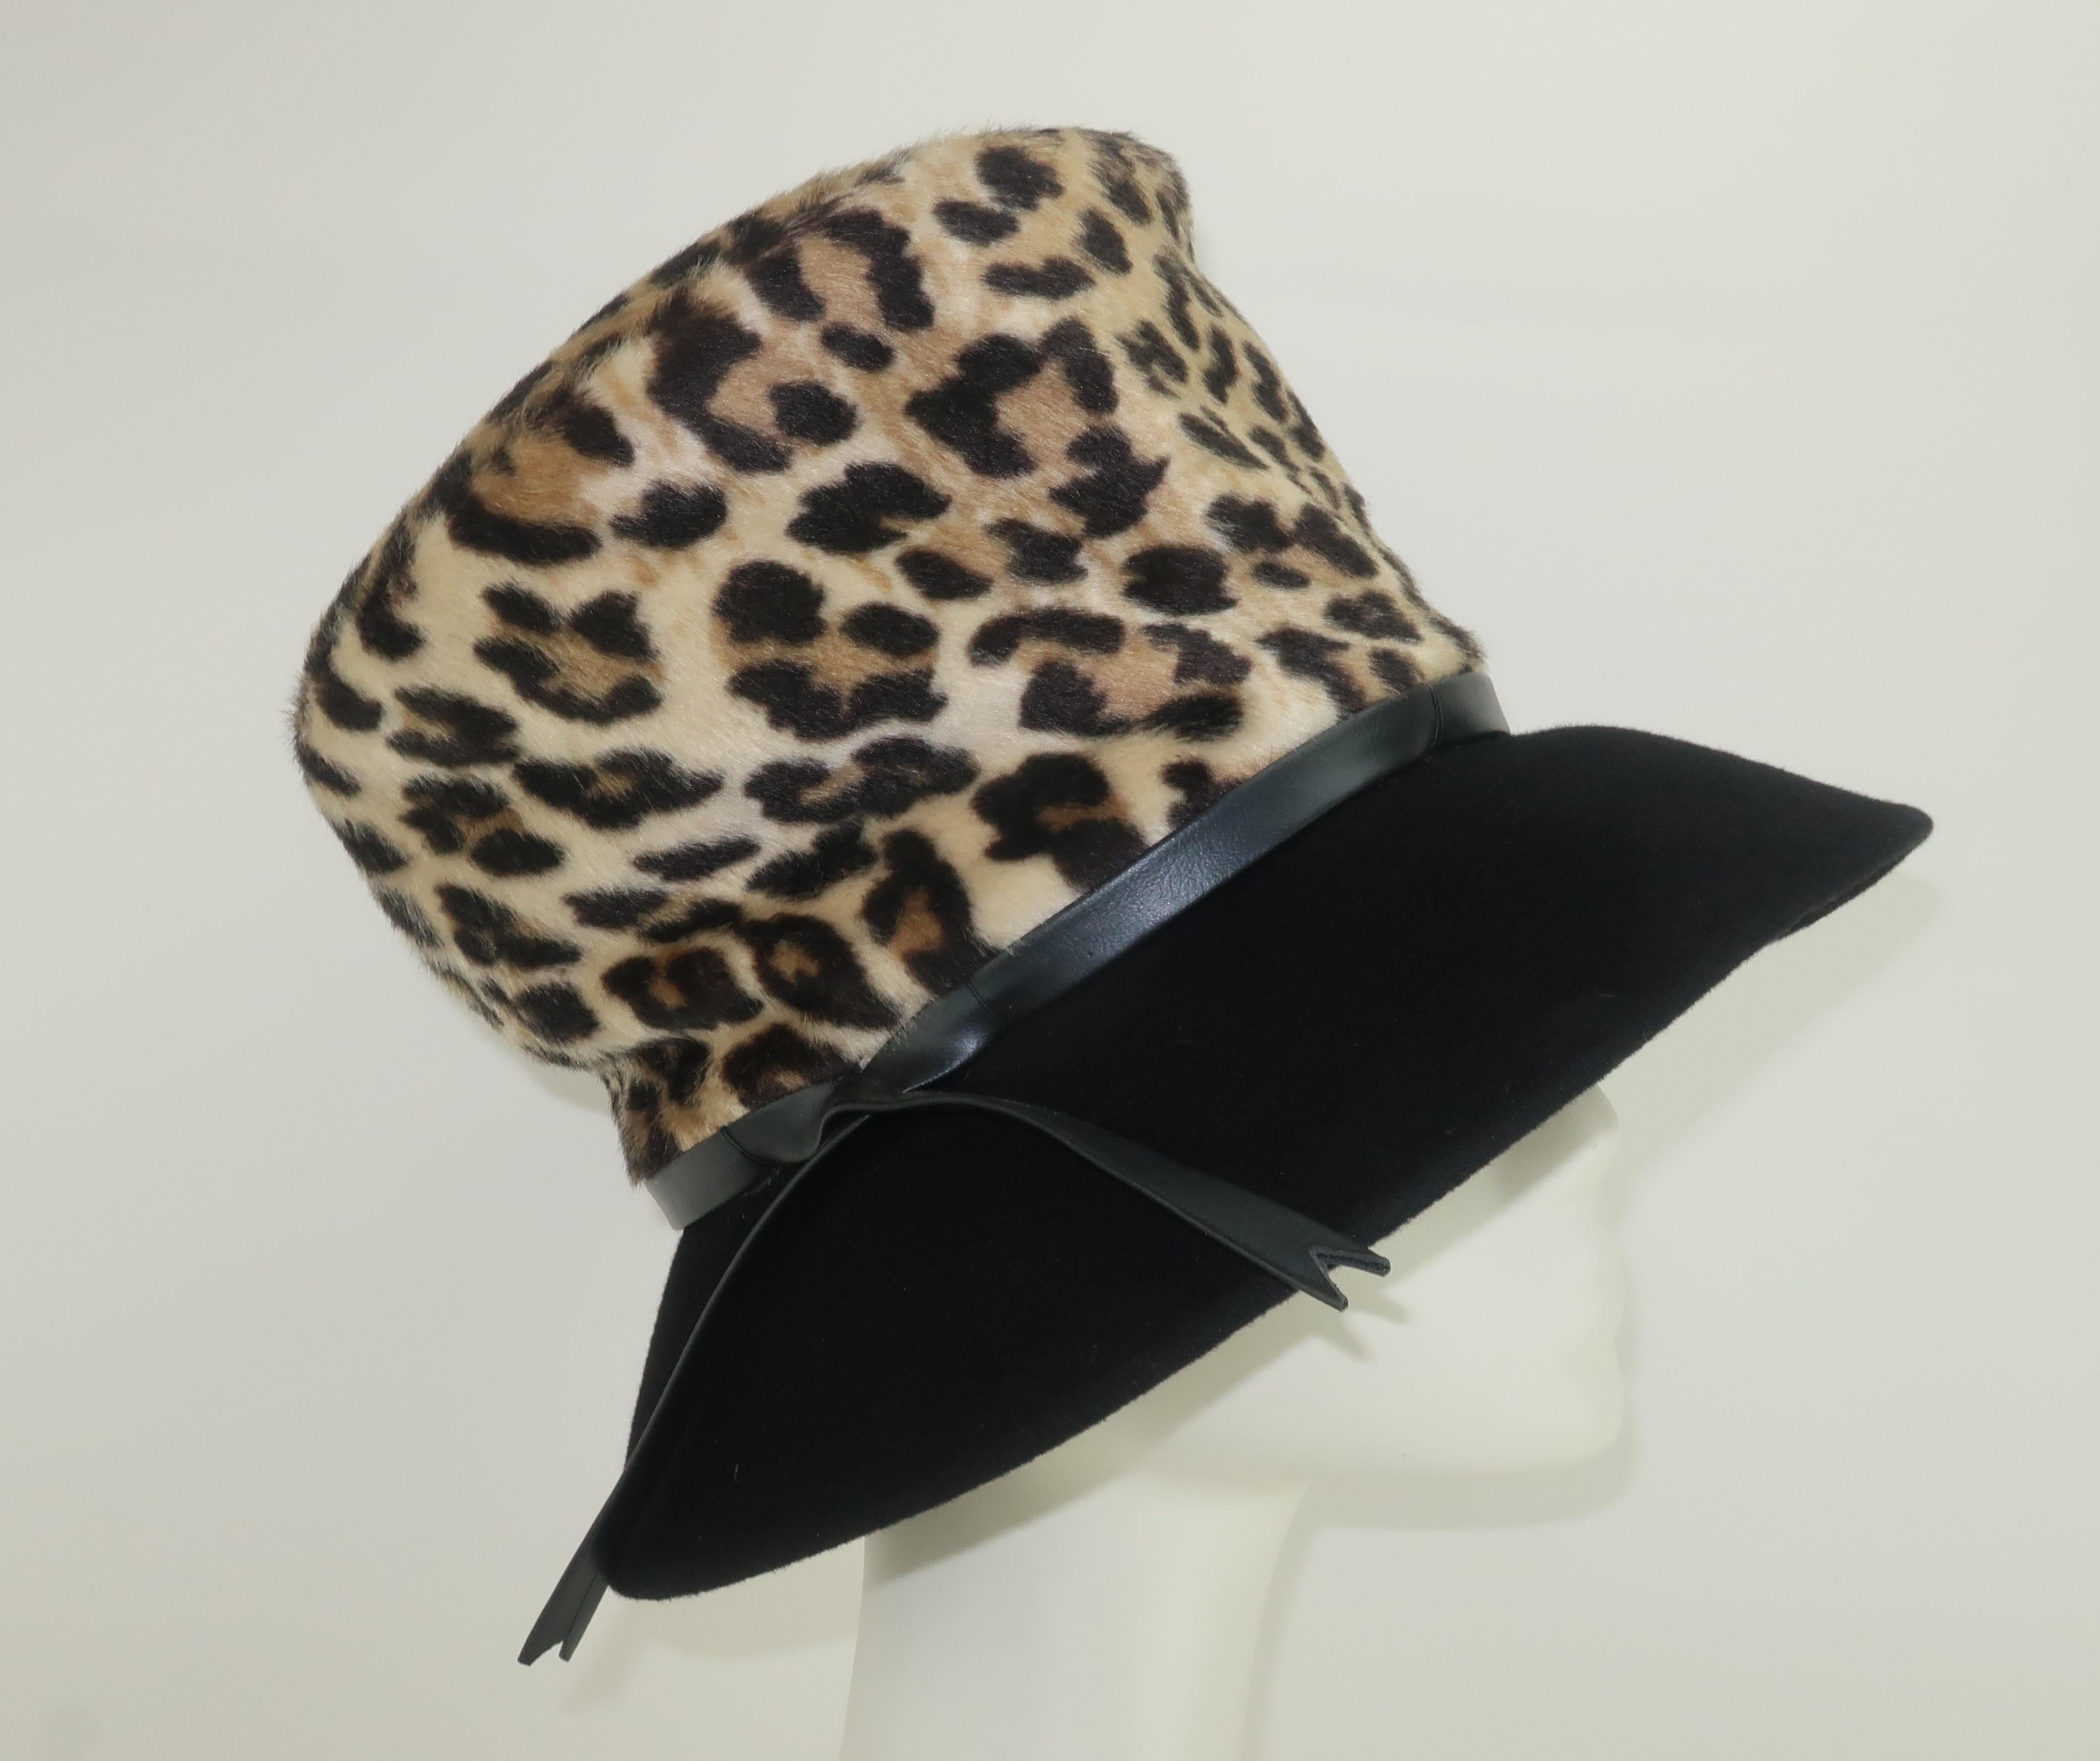 Purrrfect!  Mr. John Classic faux leopard mohair hat with a great combination of a mad hatter silhouette and a period perfect 1960’s ‘floppy’ style.  The hat is constructed in a faux fur with wool felt brim and a leatherette crisscross band.  The